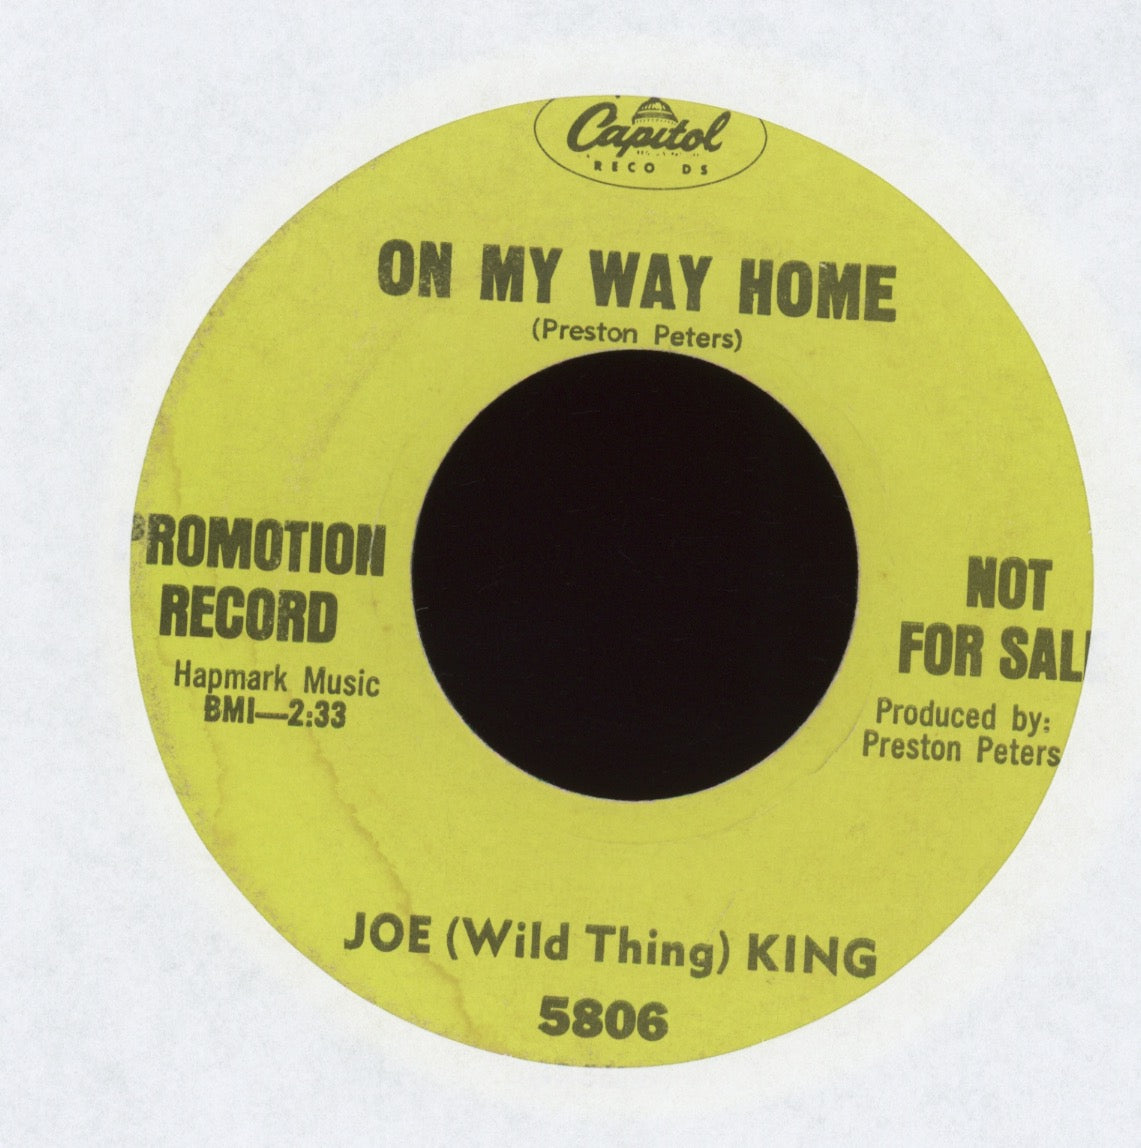 Joe (Wild Thing) King - Hold Out on Capitol Promo